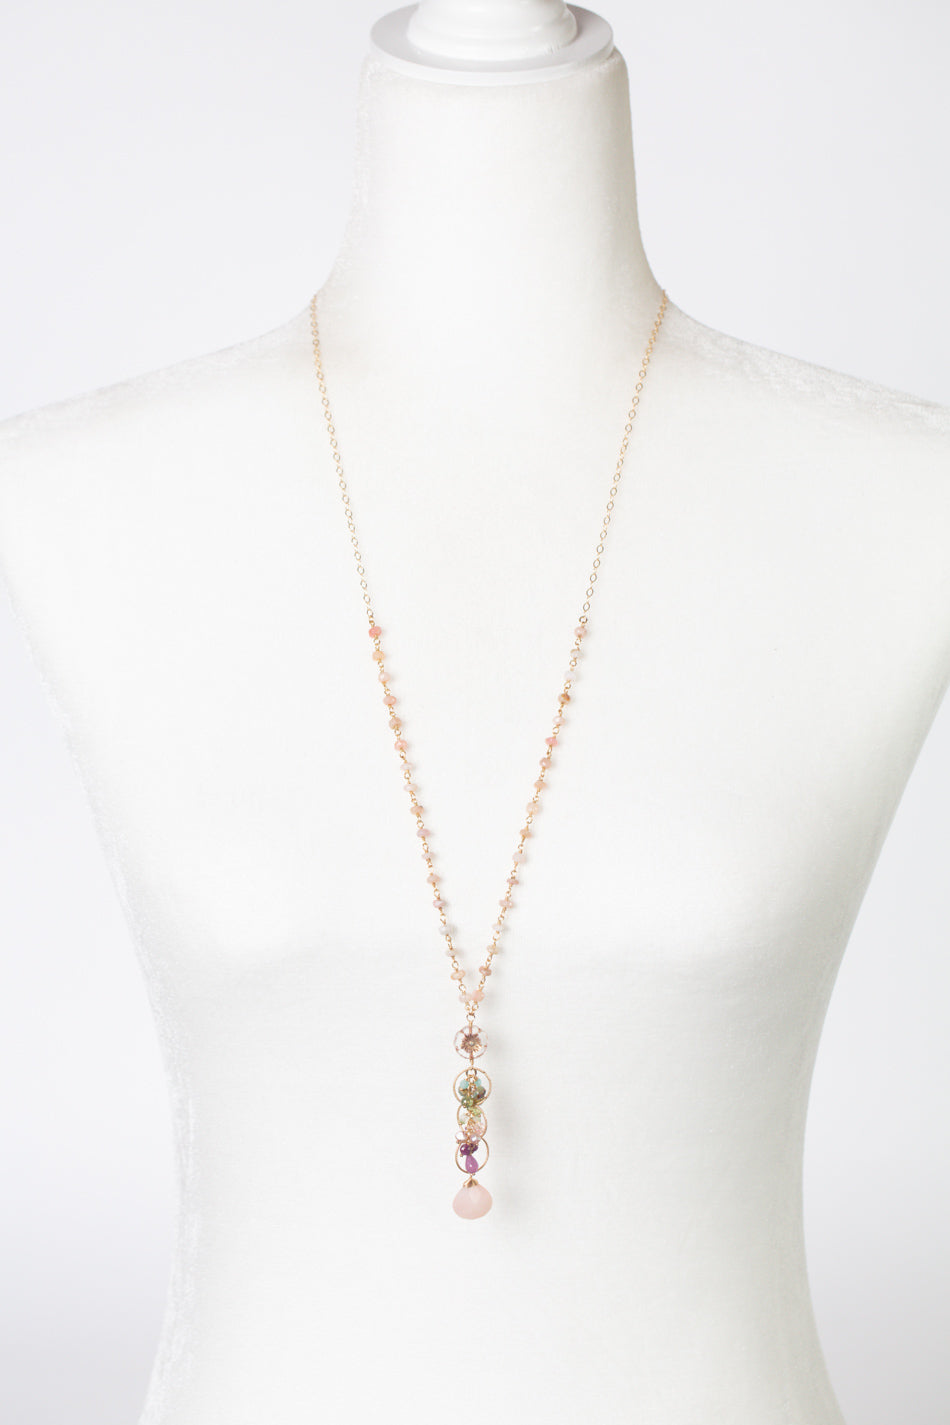 Hope 28.5-30.5" Pearl, Ruby, Czech Glass With Pink Opal Cluster Necklace